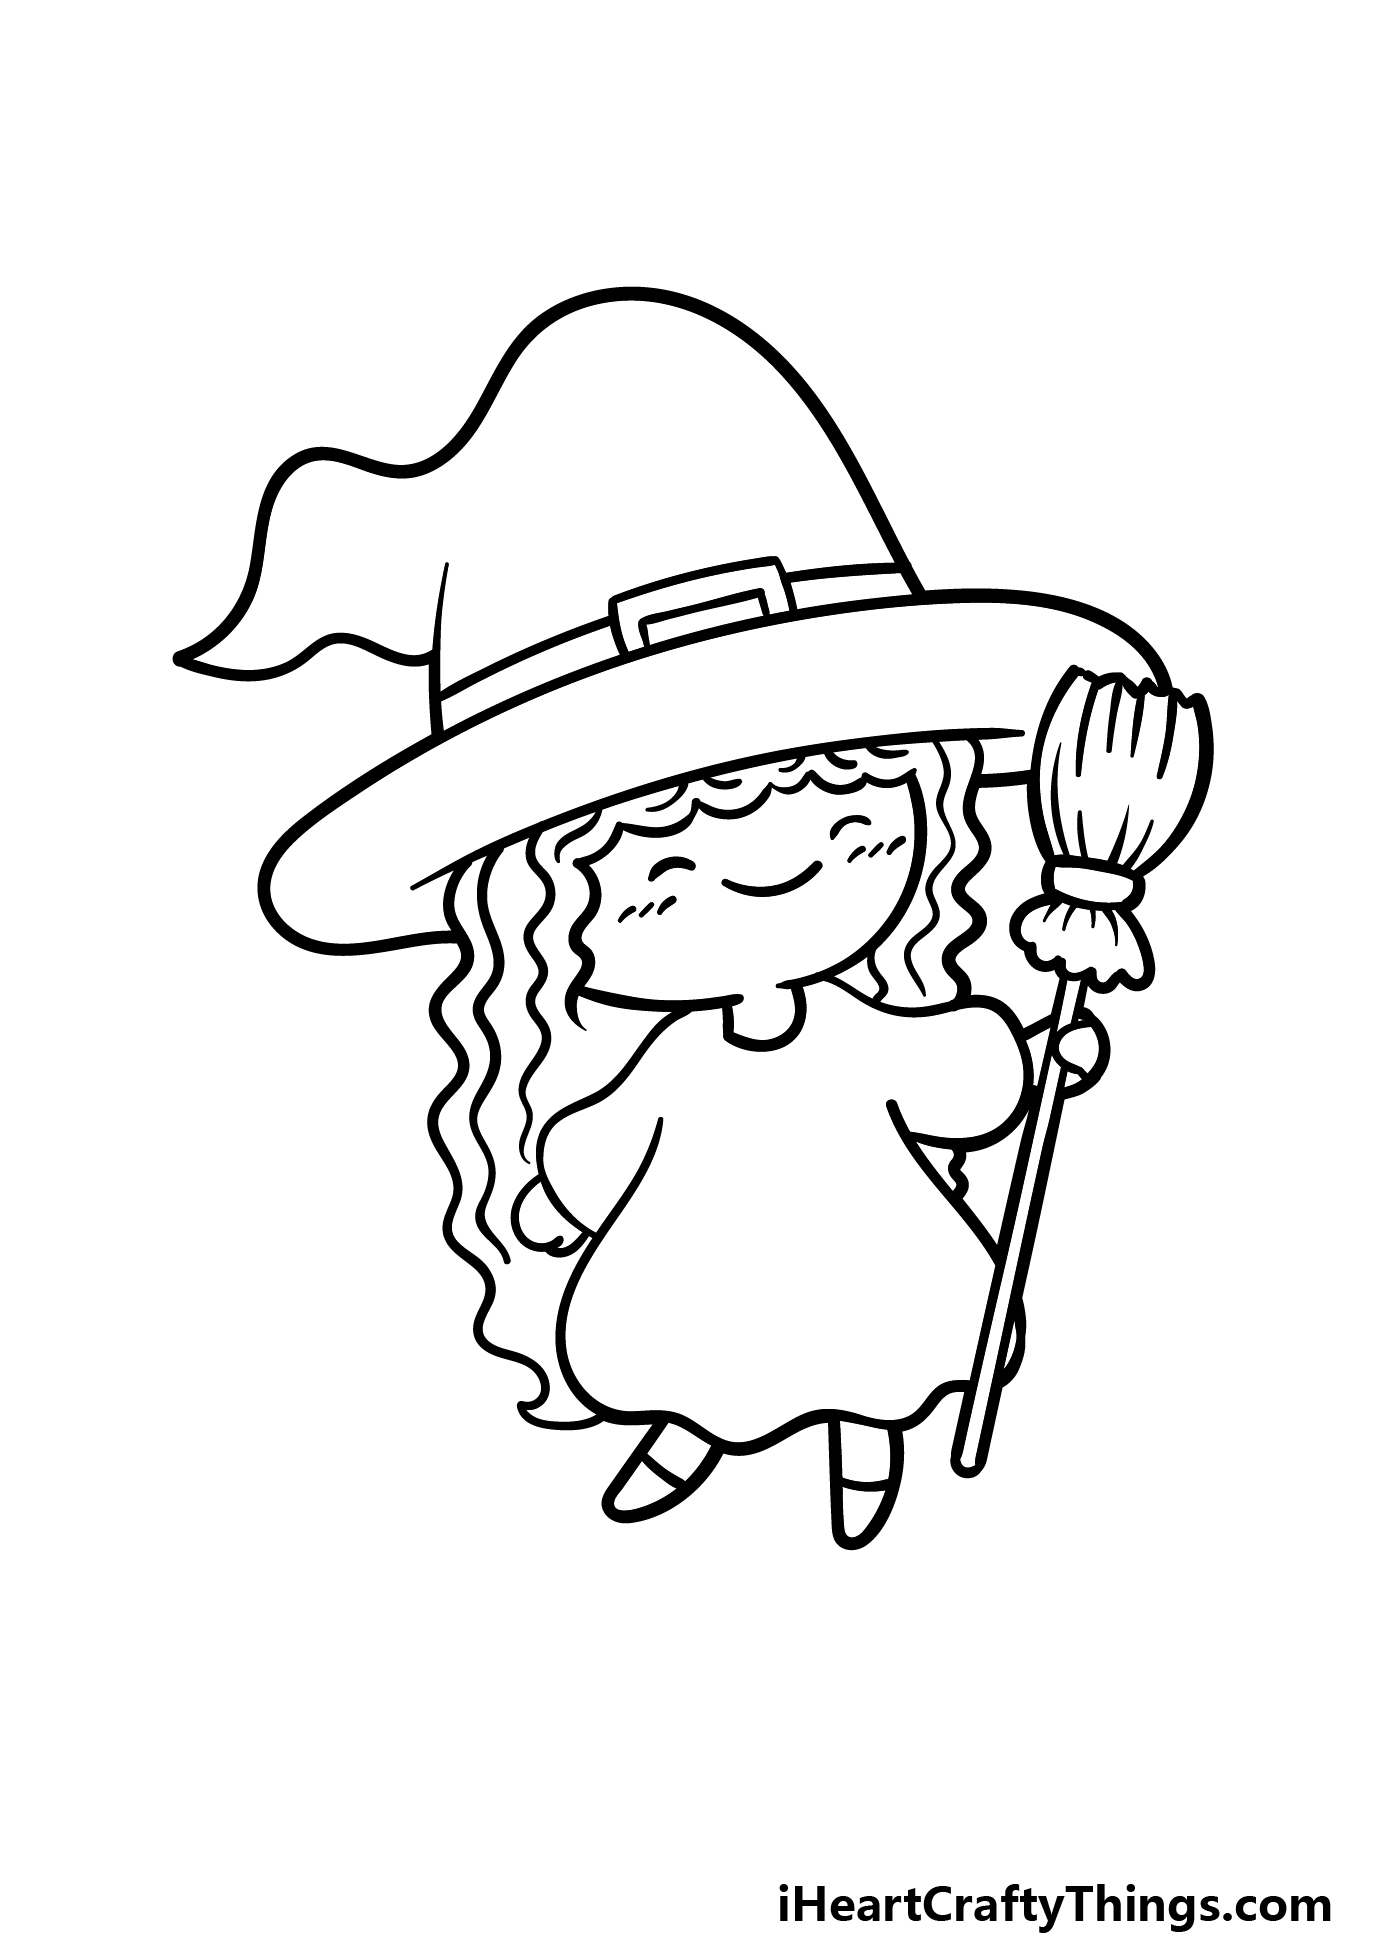 Cartoon Witch Drawing - How To Draw A Cartoon Witch Step By Step